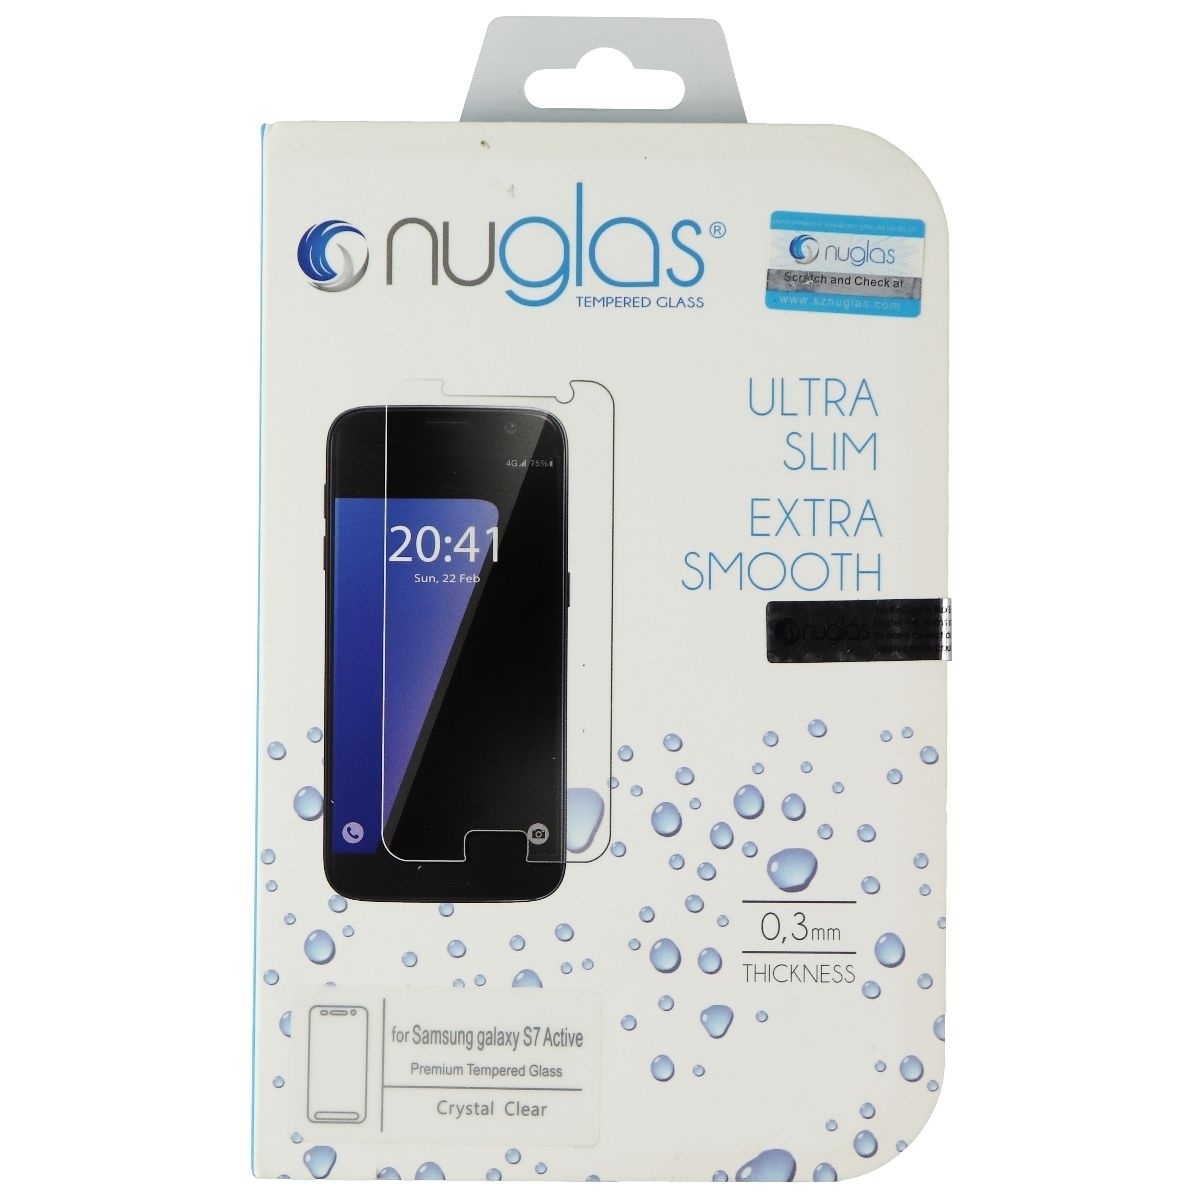 NuGlas Tempered Glass Screen Protector For Samsung Galaxy S7 Active - Clear